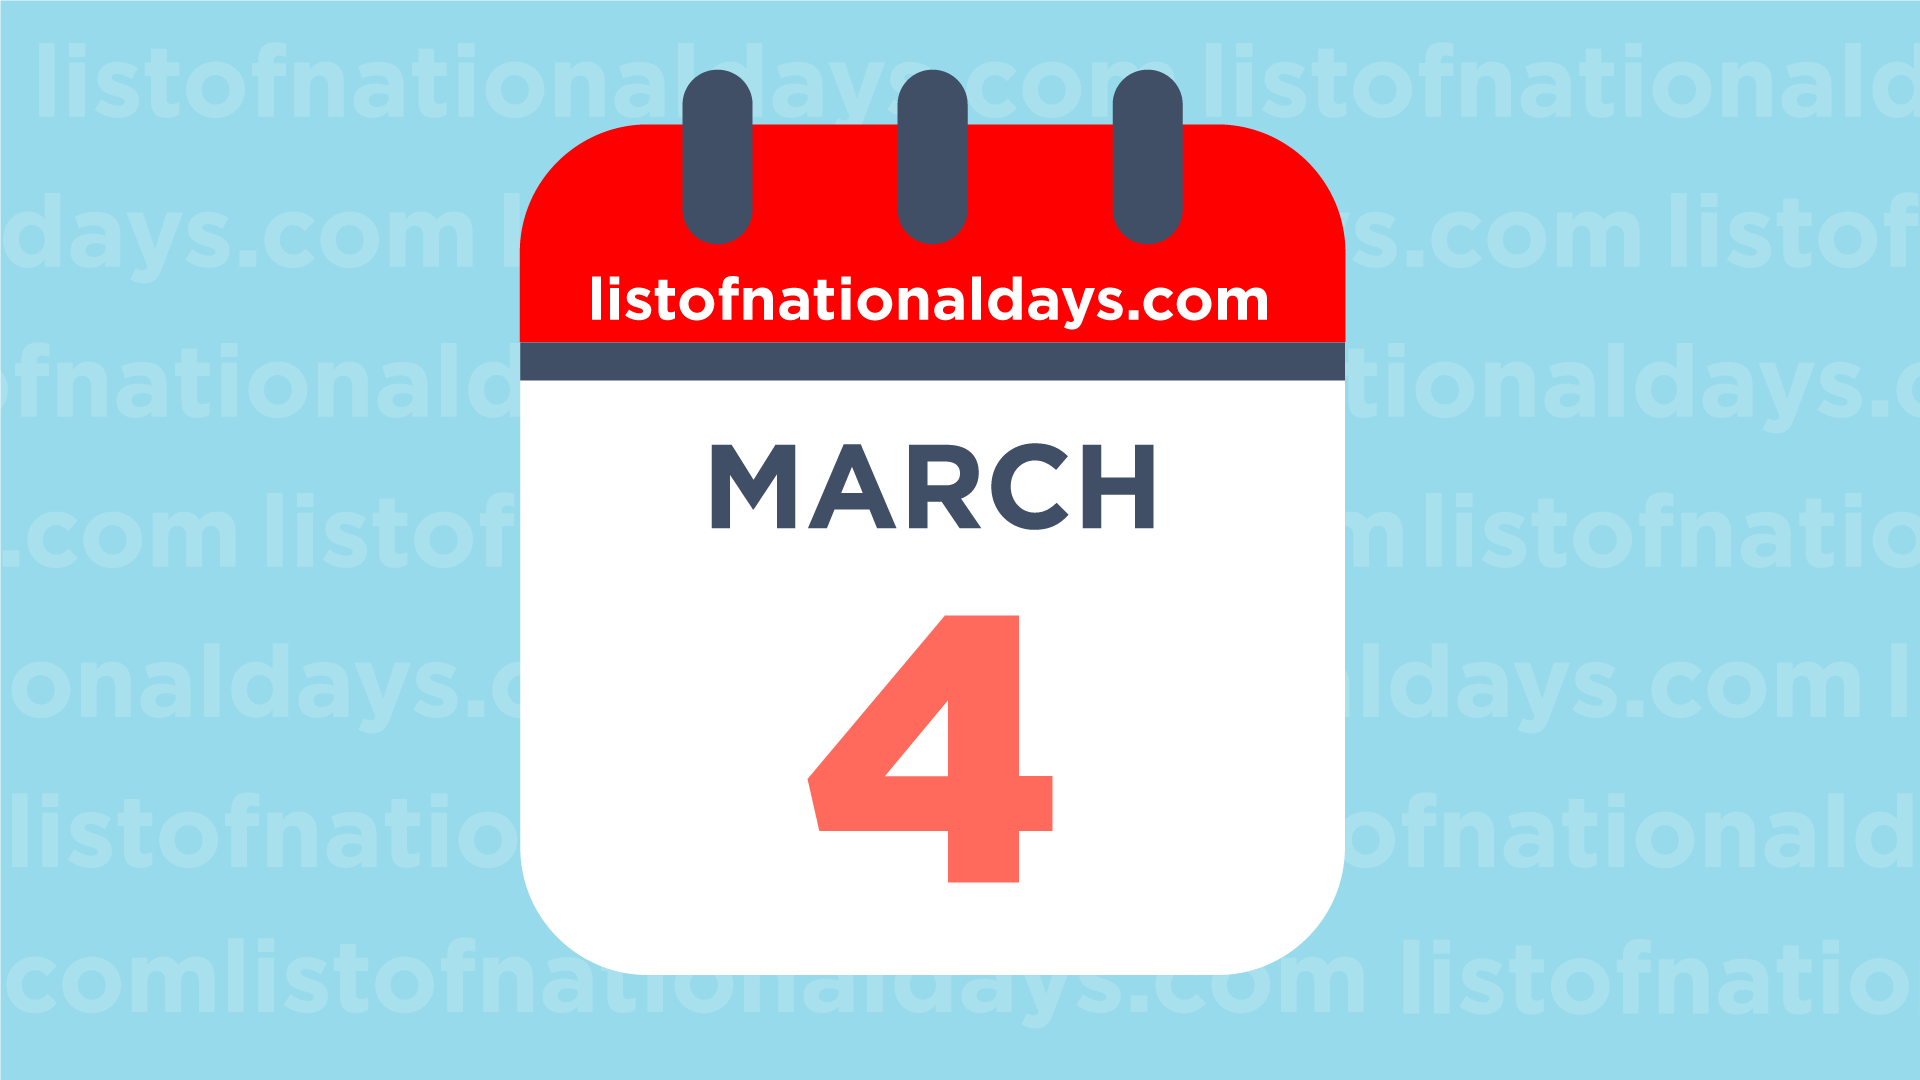 MARCH 4TH: National Holidays,Observances & Famous Birthdays